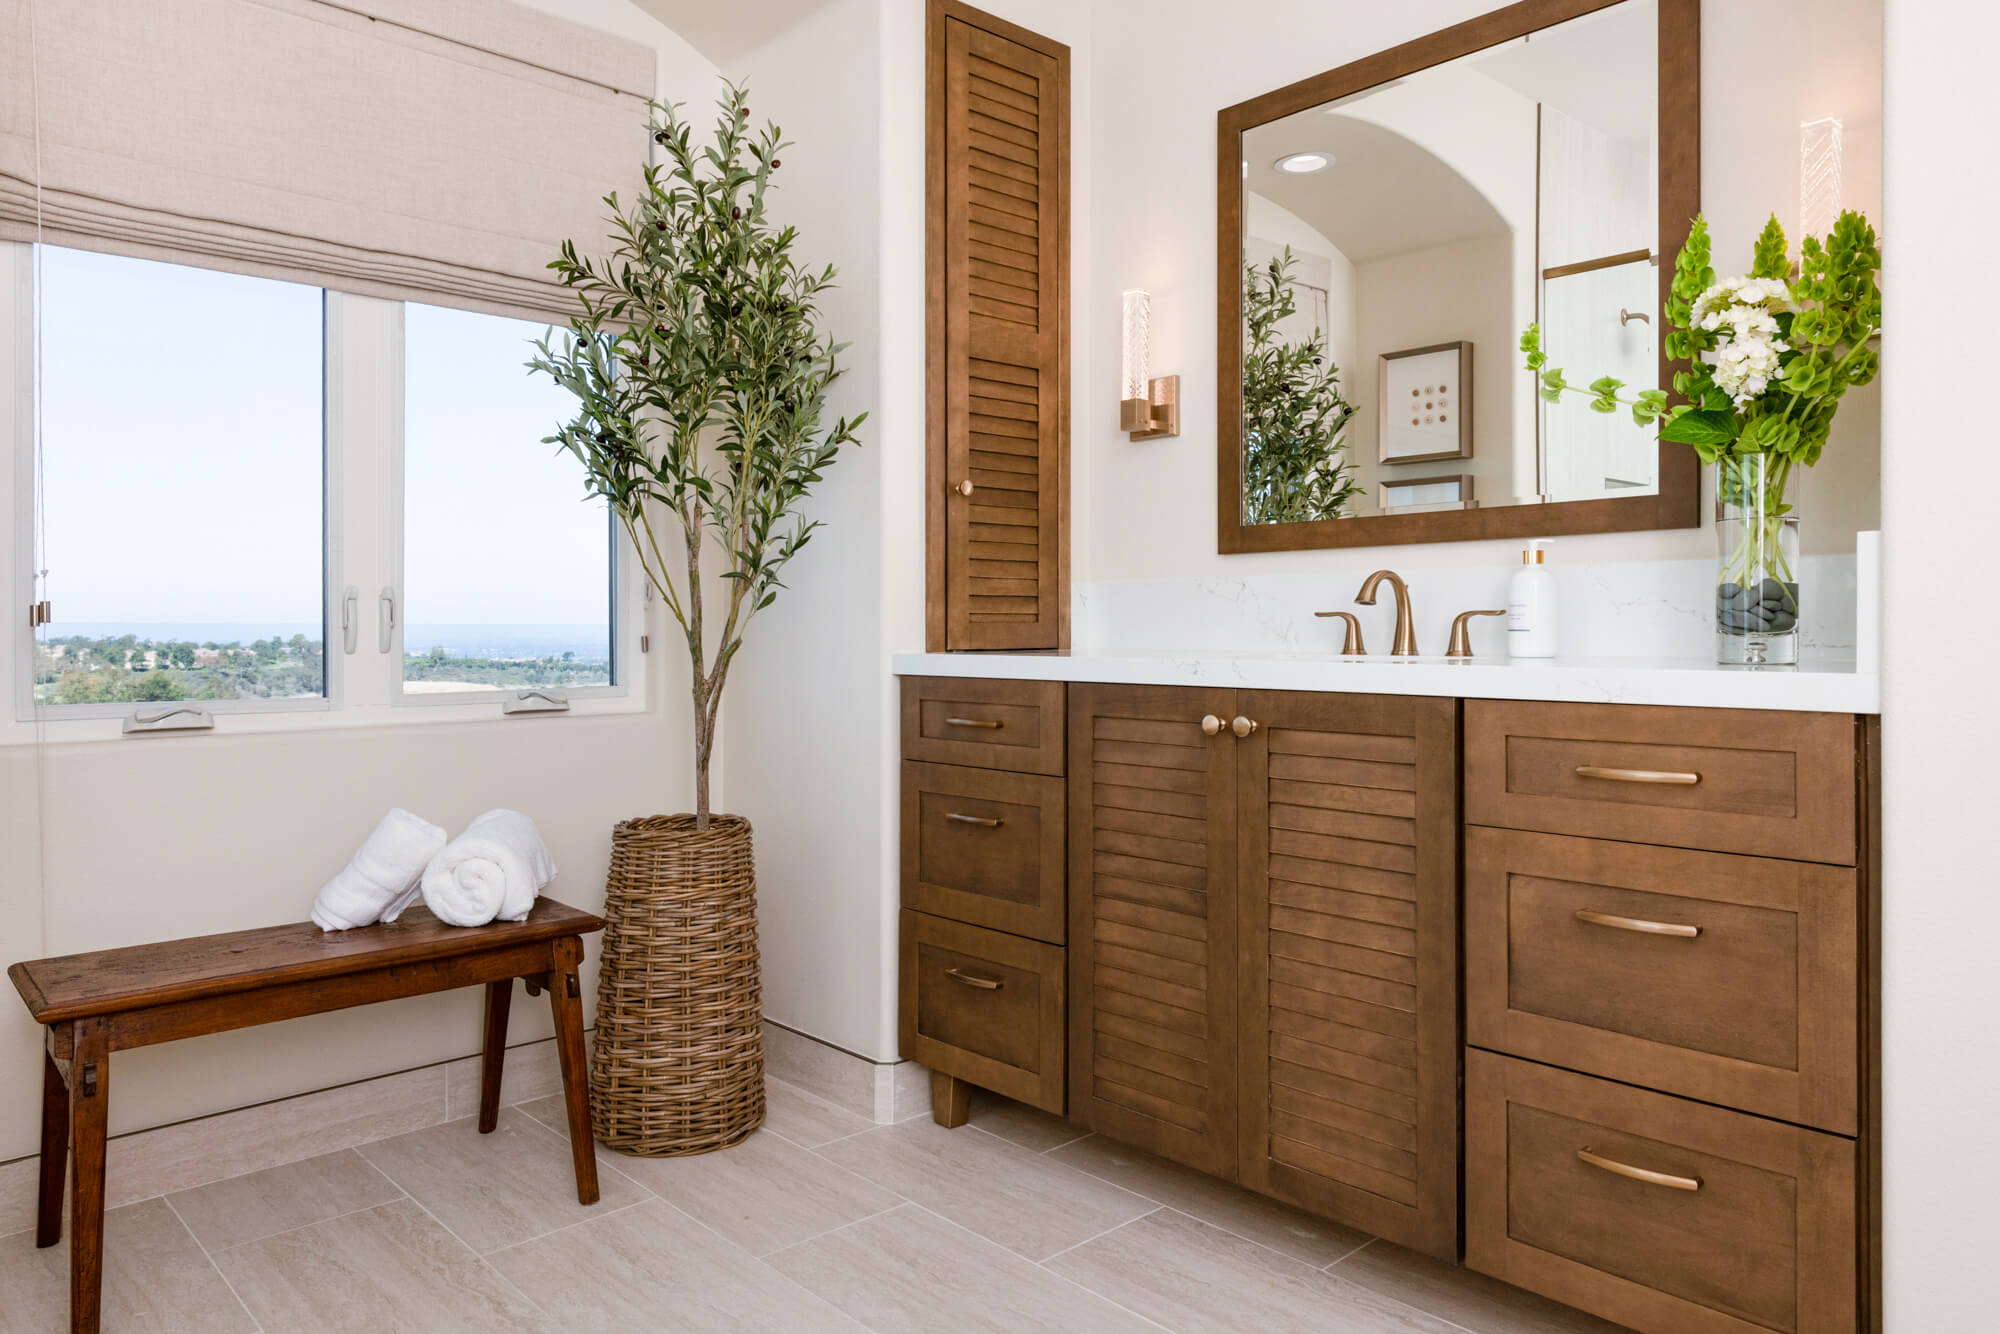 Newport Coast bathroom remodel with vanity, seating bench, and natural lighting